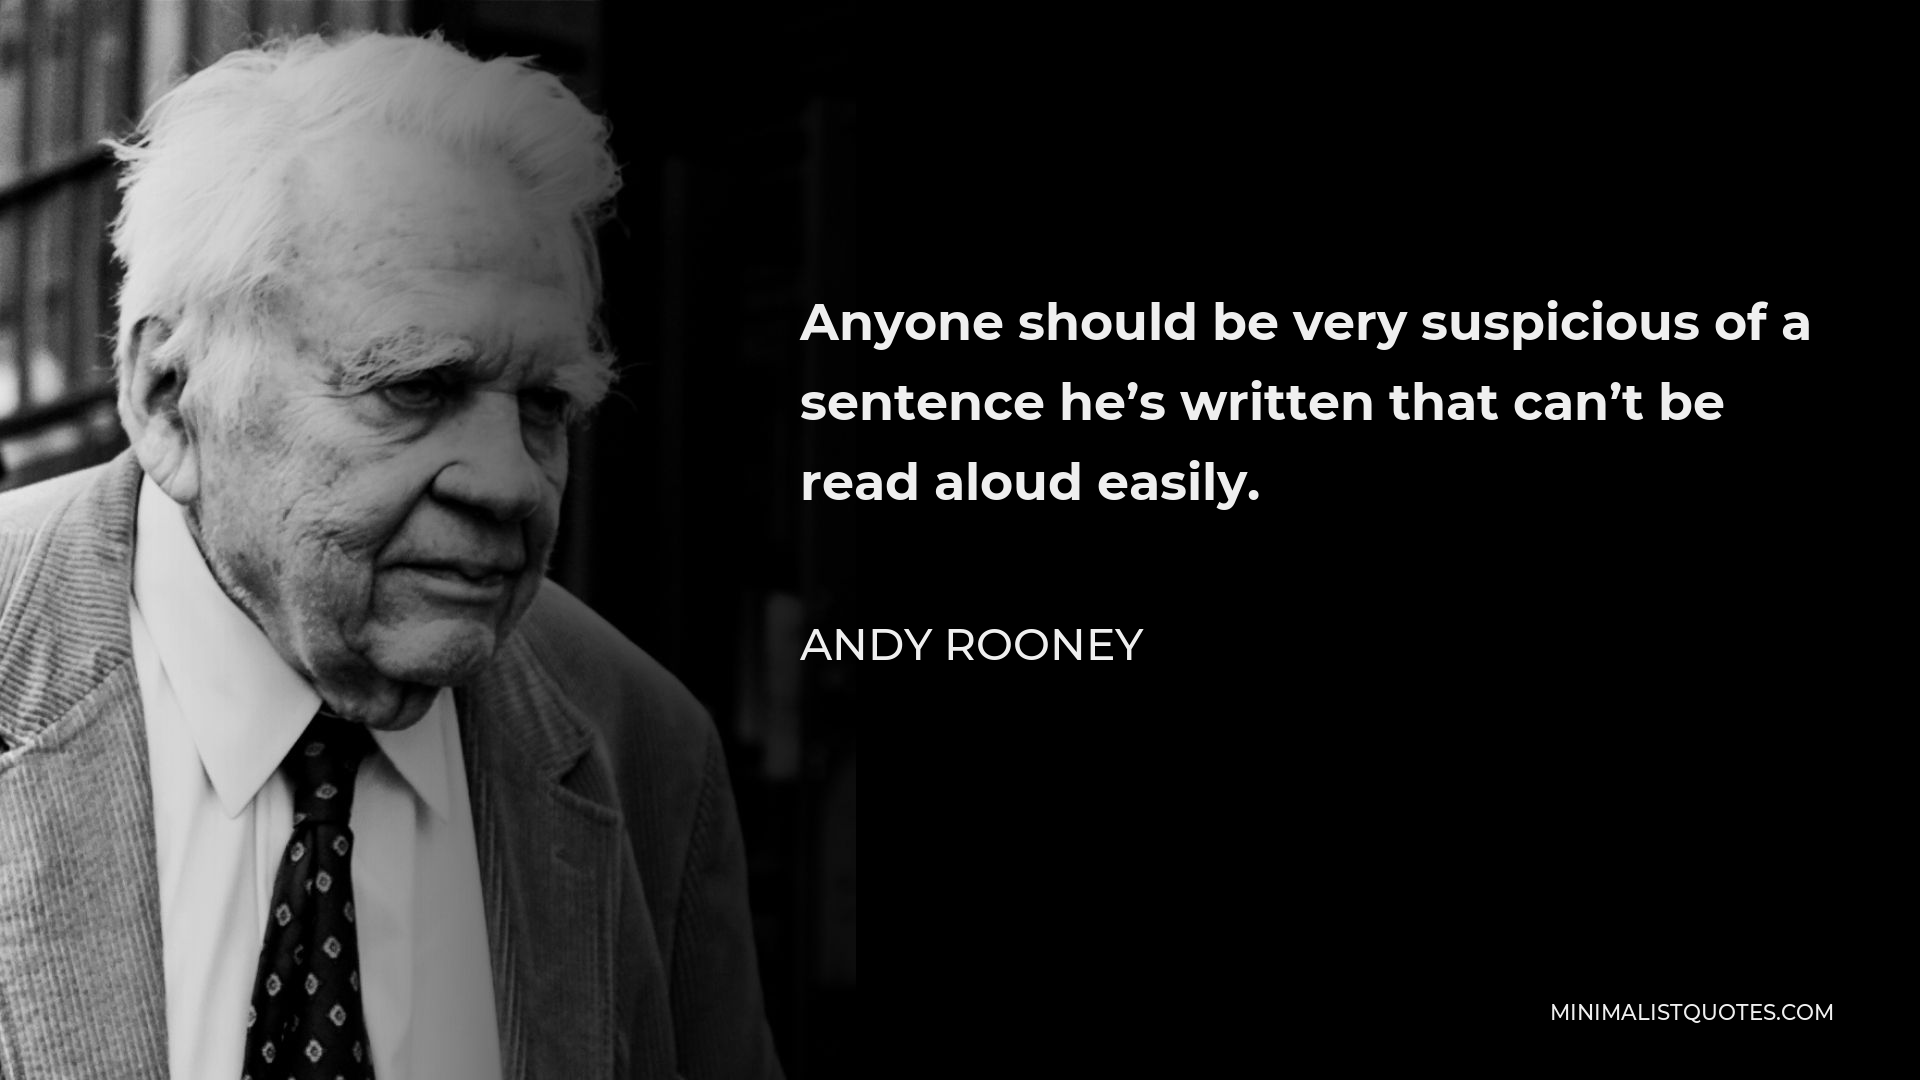 Andy Rooney Quote - Anyone should be very suspicious of a sentence he’s written that can’t be read aloud easily.